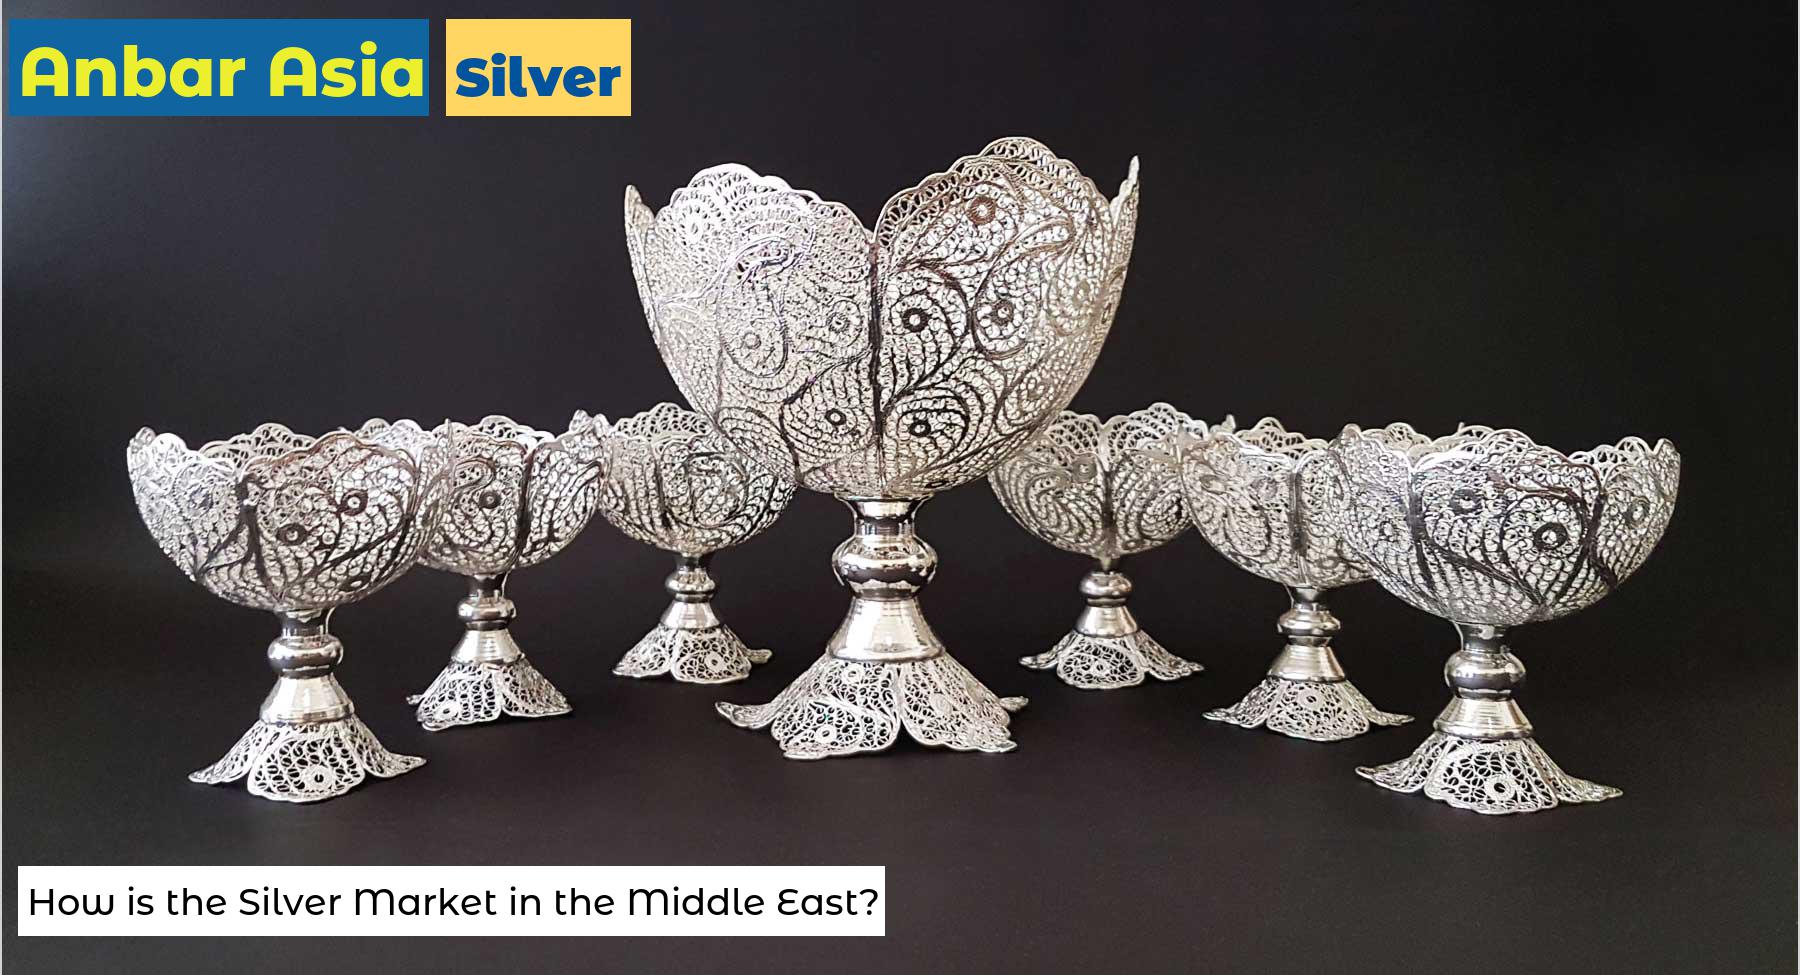 How is the Silver Market in the Middle East?